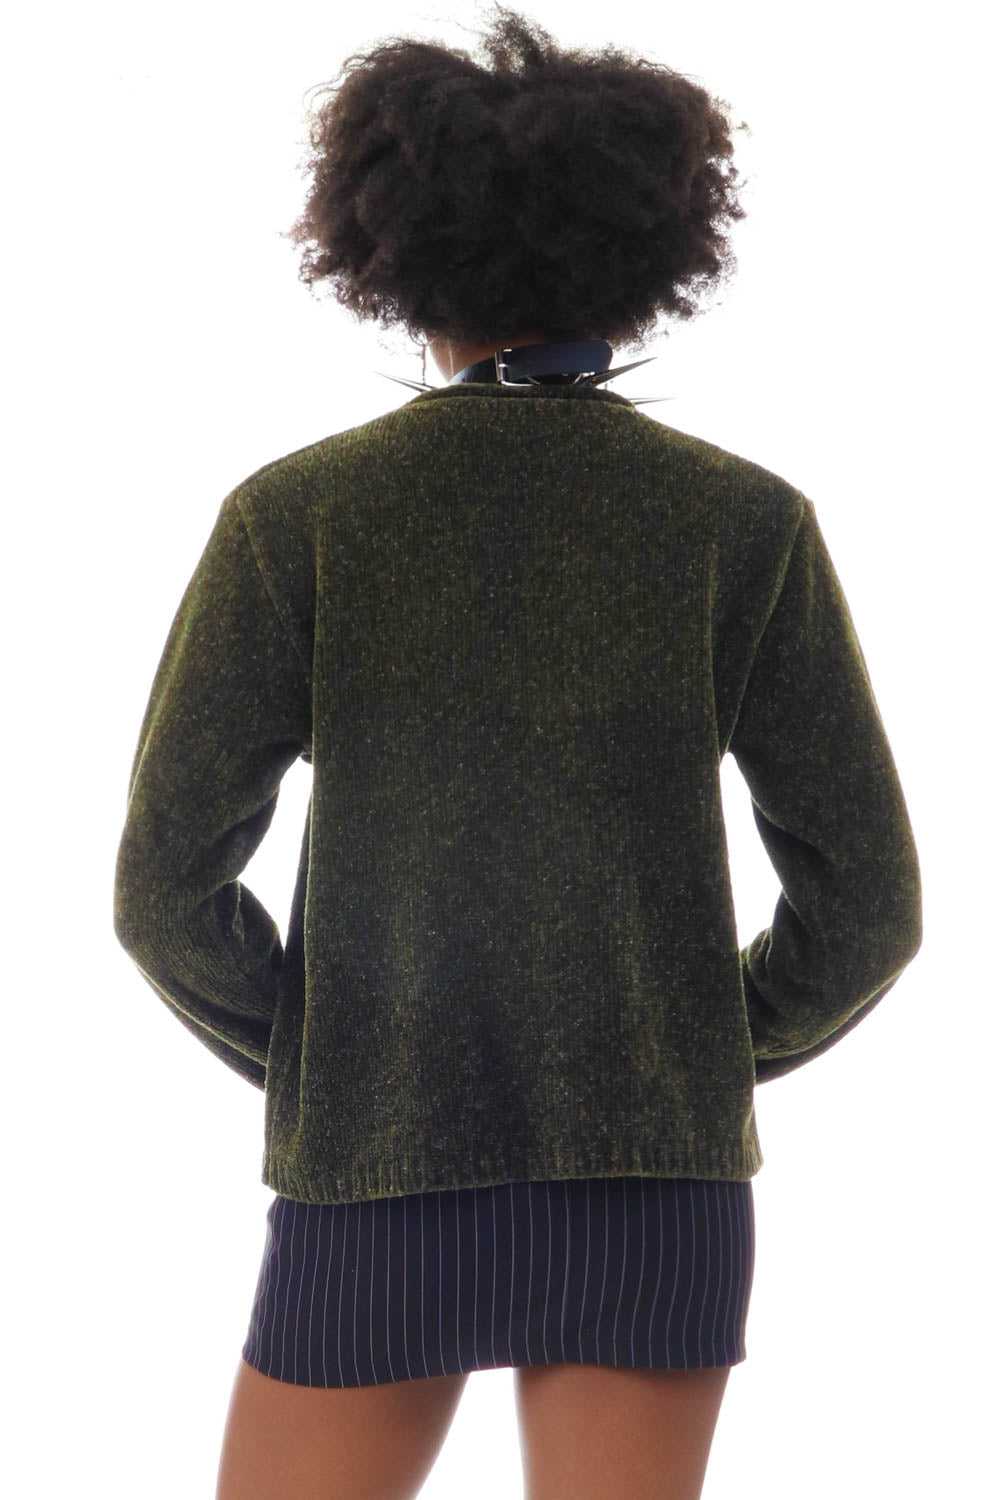 Vintage 90's Fuzzy Green Sweater - S/M - image 5